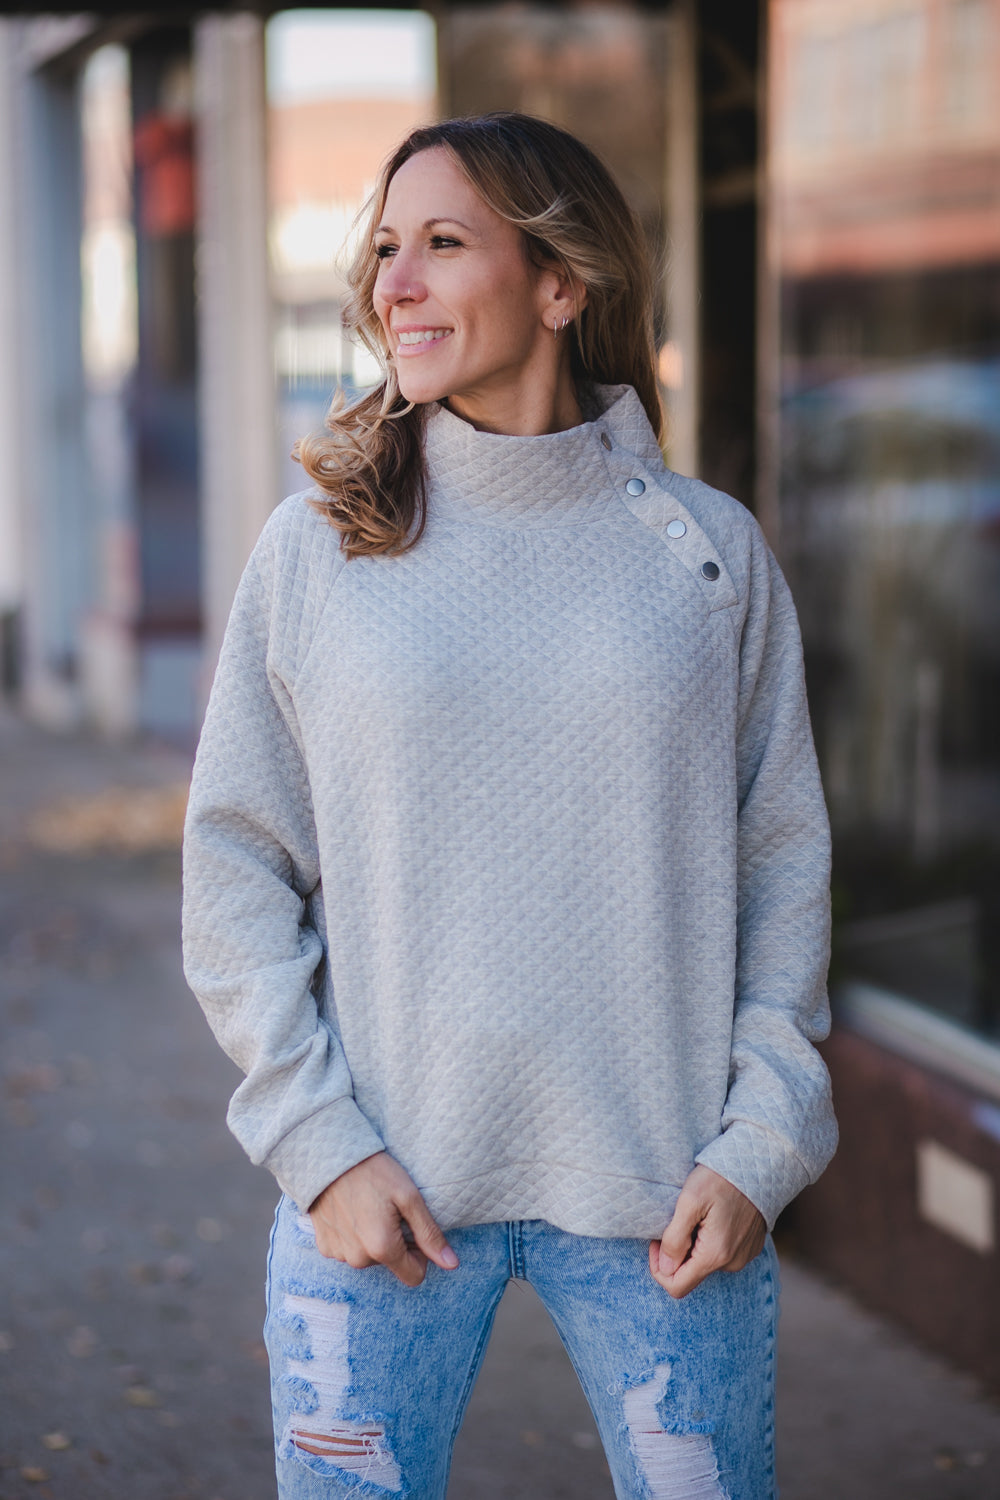 Sleigh Ride Quilted Sweatshirt - Oatmeal